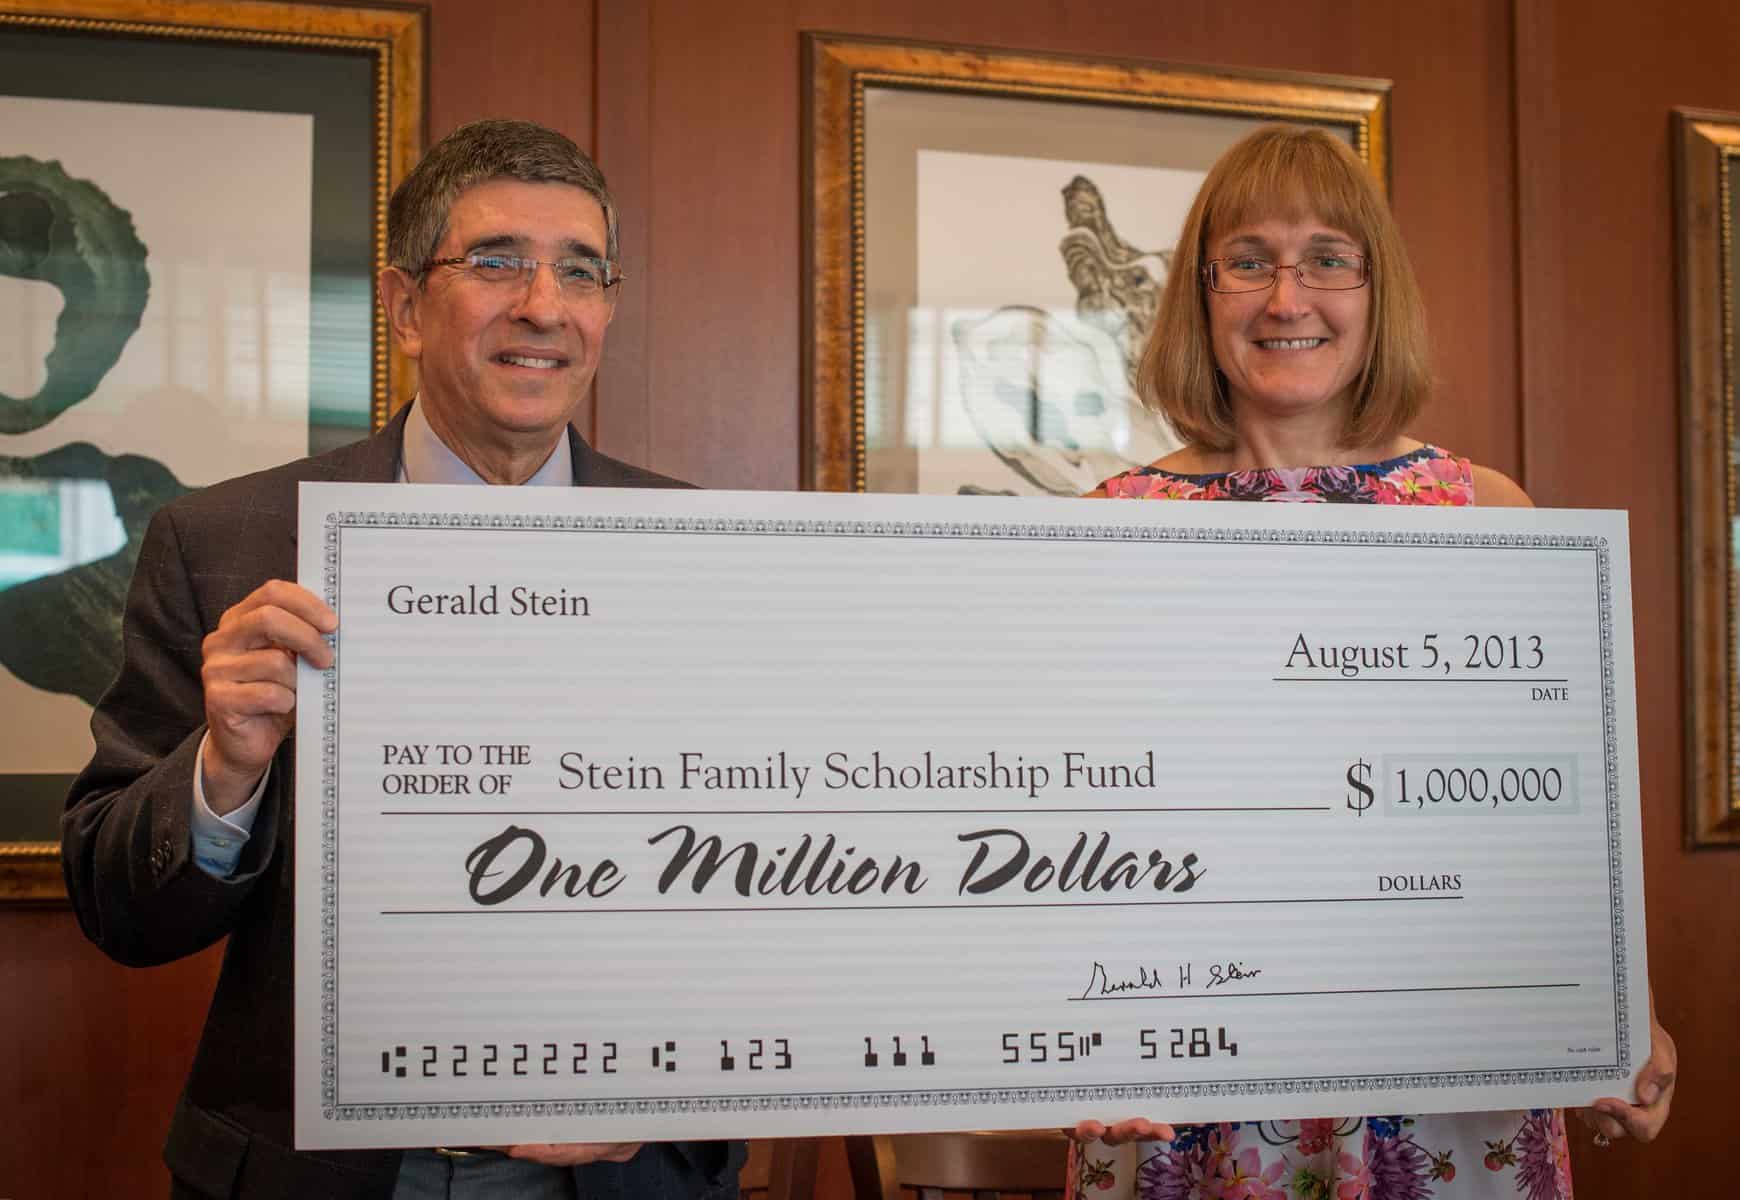 Philip Rovner and Shelby Tudor from the Tidewater Jewish Foundation graciously accept the Steins’ donation.